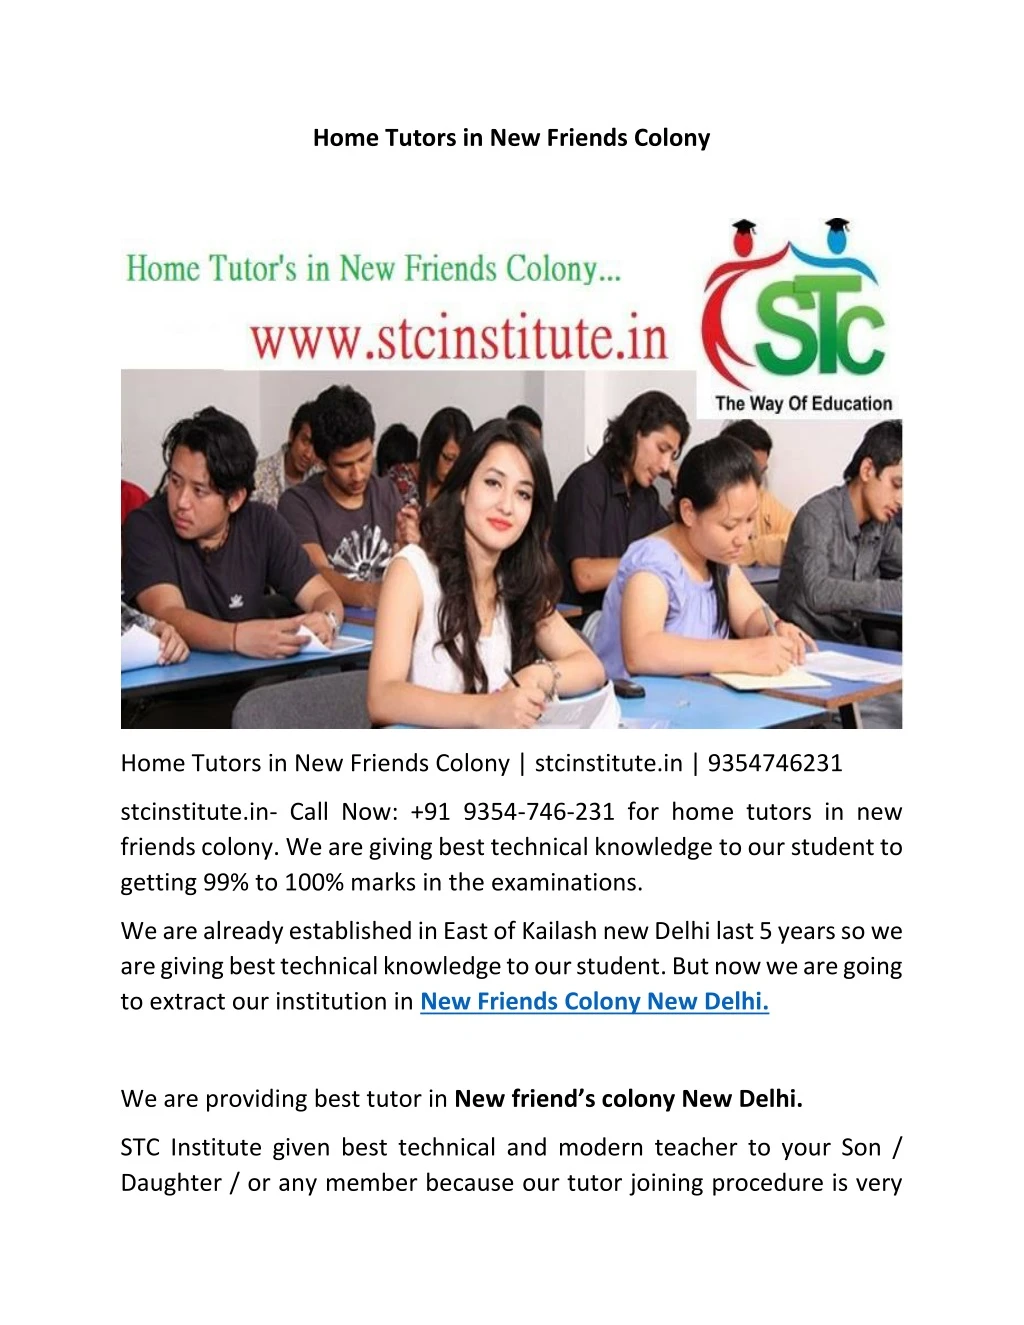 home tutors in new friends colony